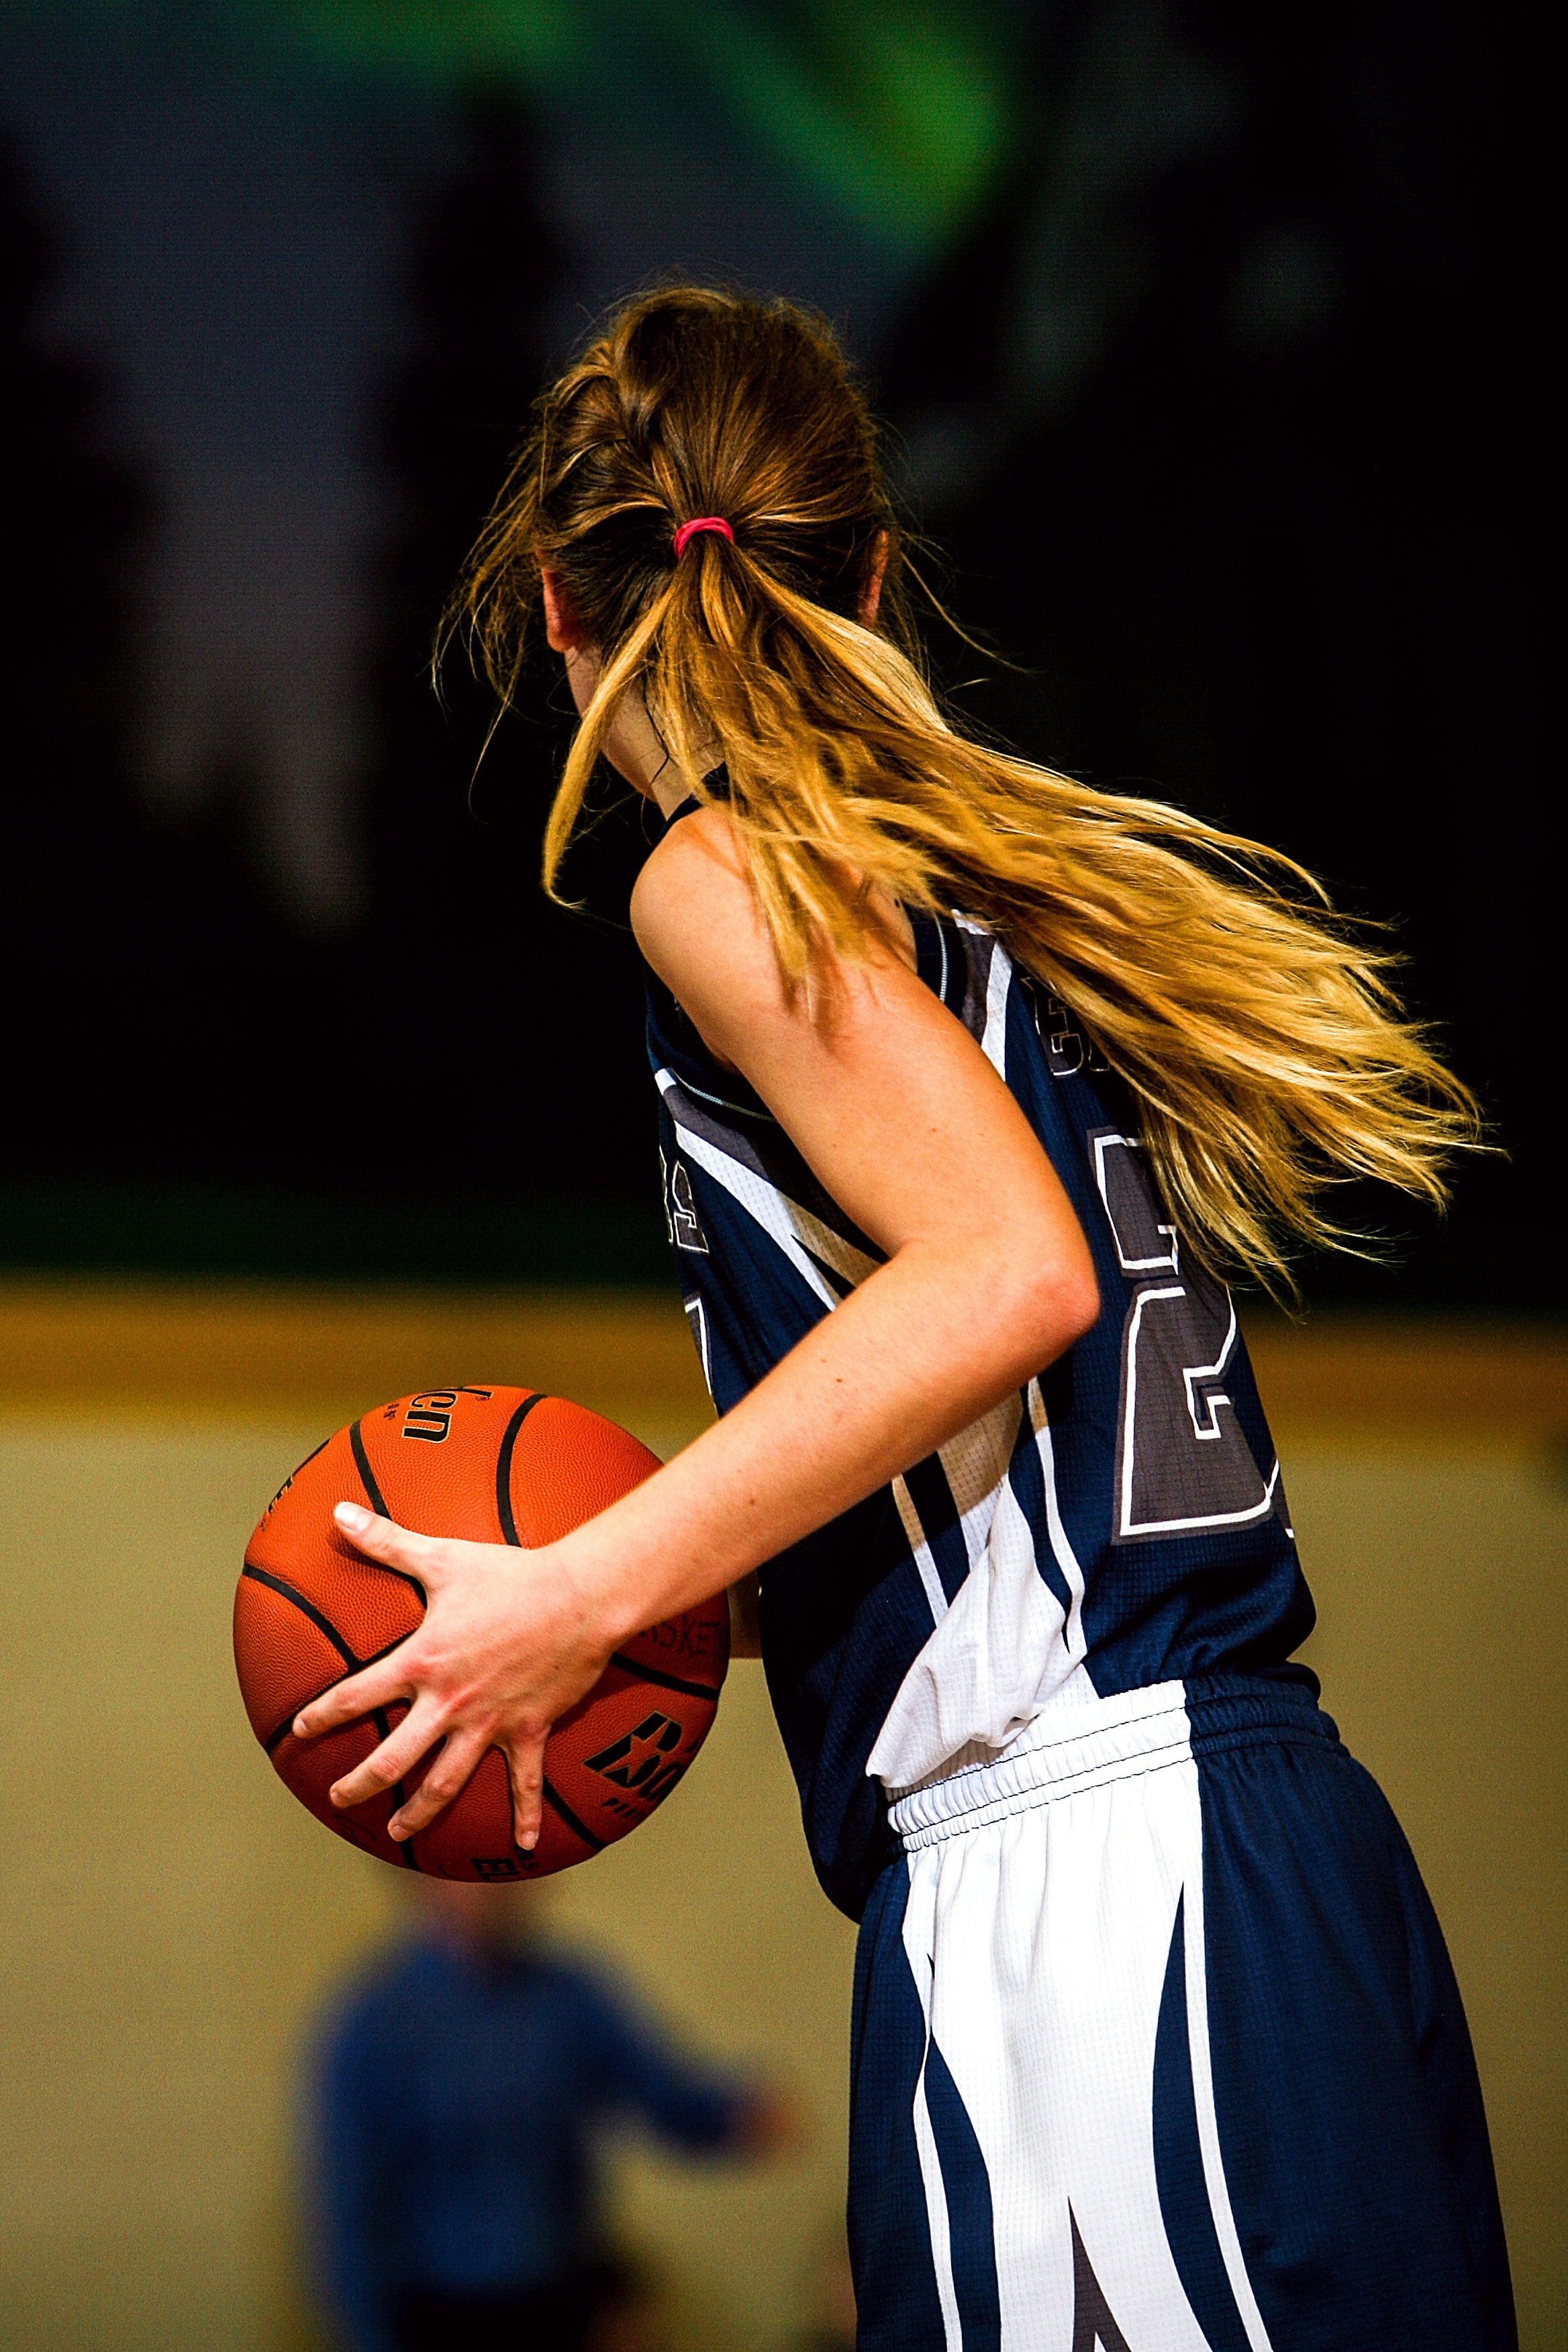 Woman in Blue and White Basketball Jersey Holding Brown Basketball, Athlete, Ball, Basketball, Female, HQ Photo